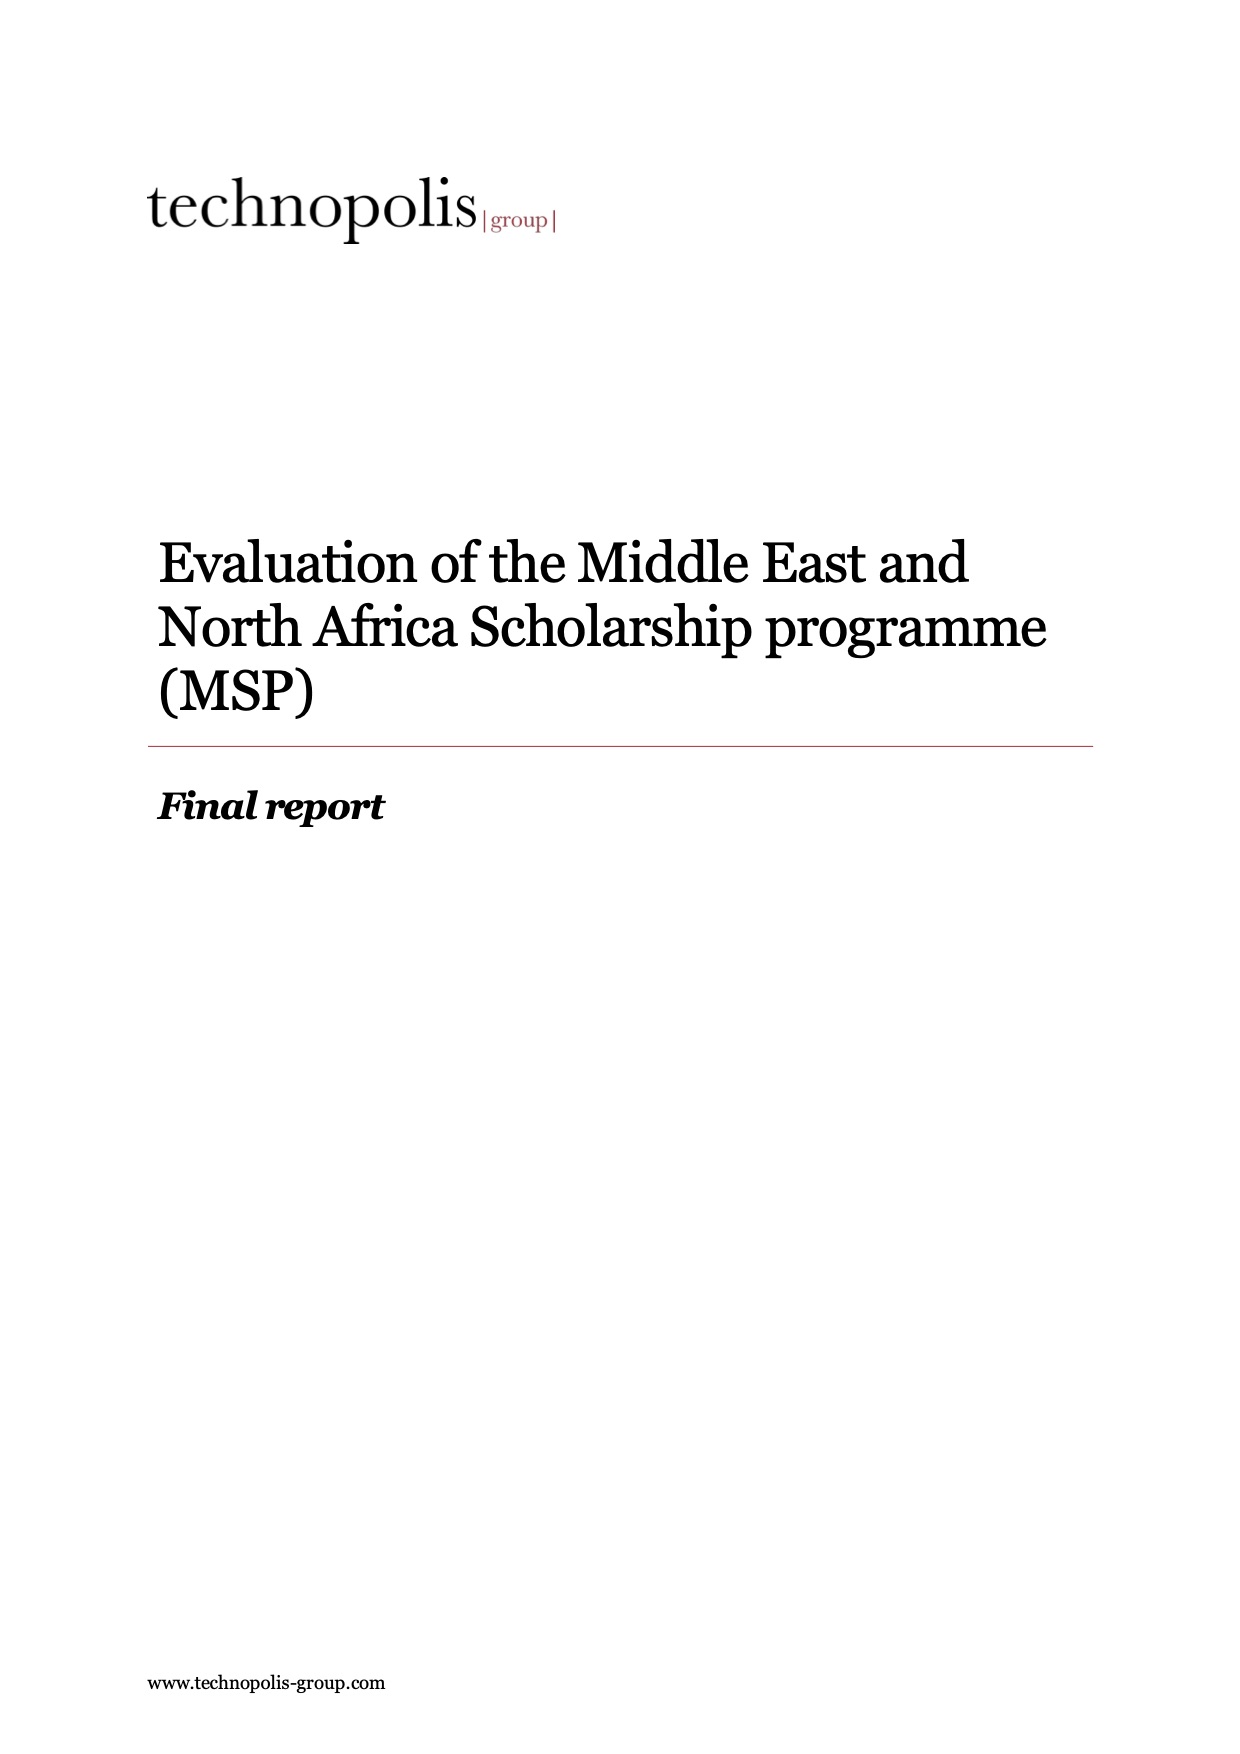 Evaluation of the “Middle East and North Africa Scholarship programme“